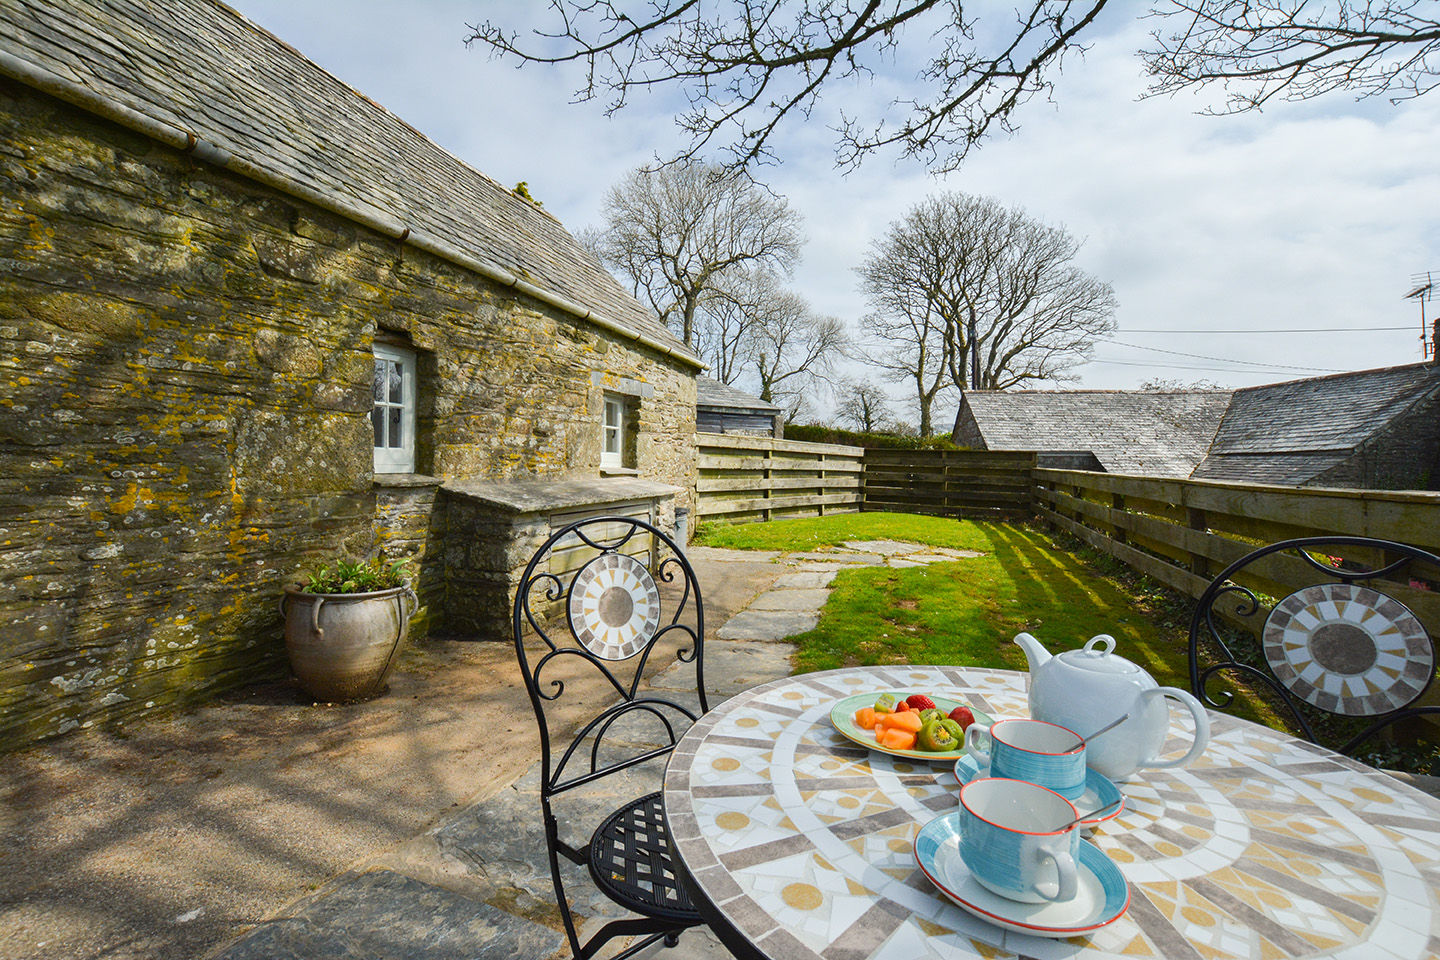 The garden at Jingles luxury self catering holiday cottage at Penrose Burden in North Cornwall near Bodmin Moor03.jpg